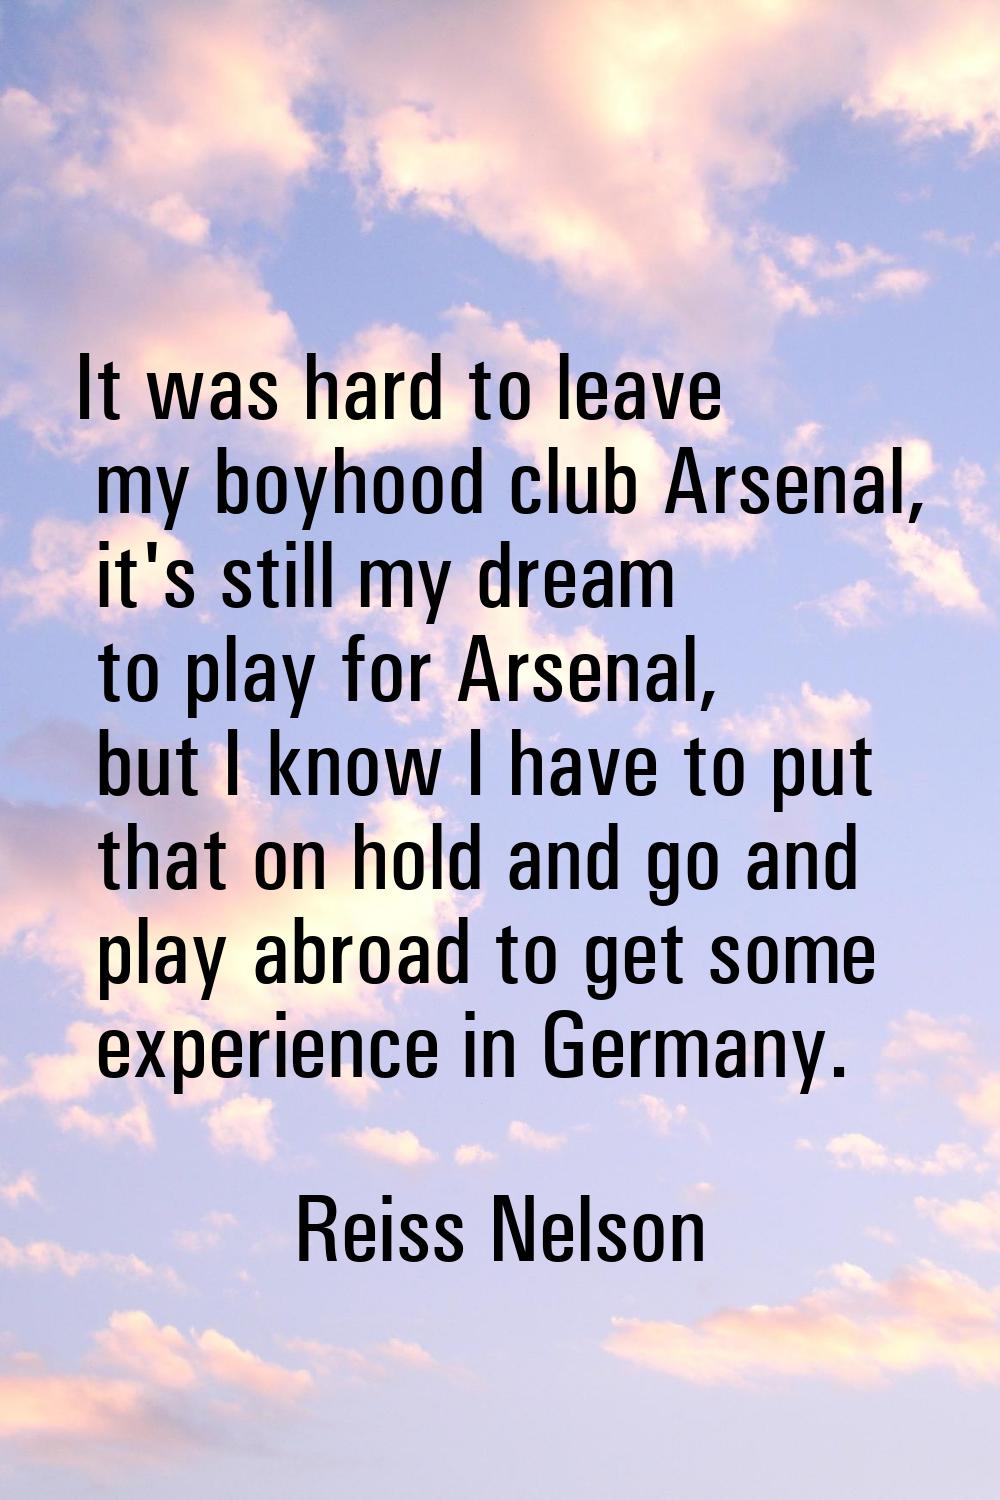 It was hard to leave my boyhood club Arsenal, it's still my dream to play for Arsenal, but I know I